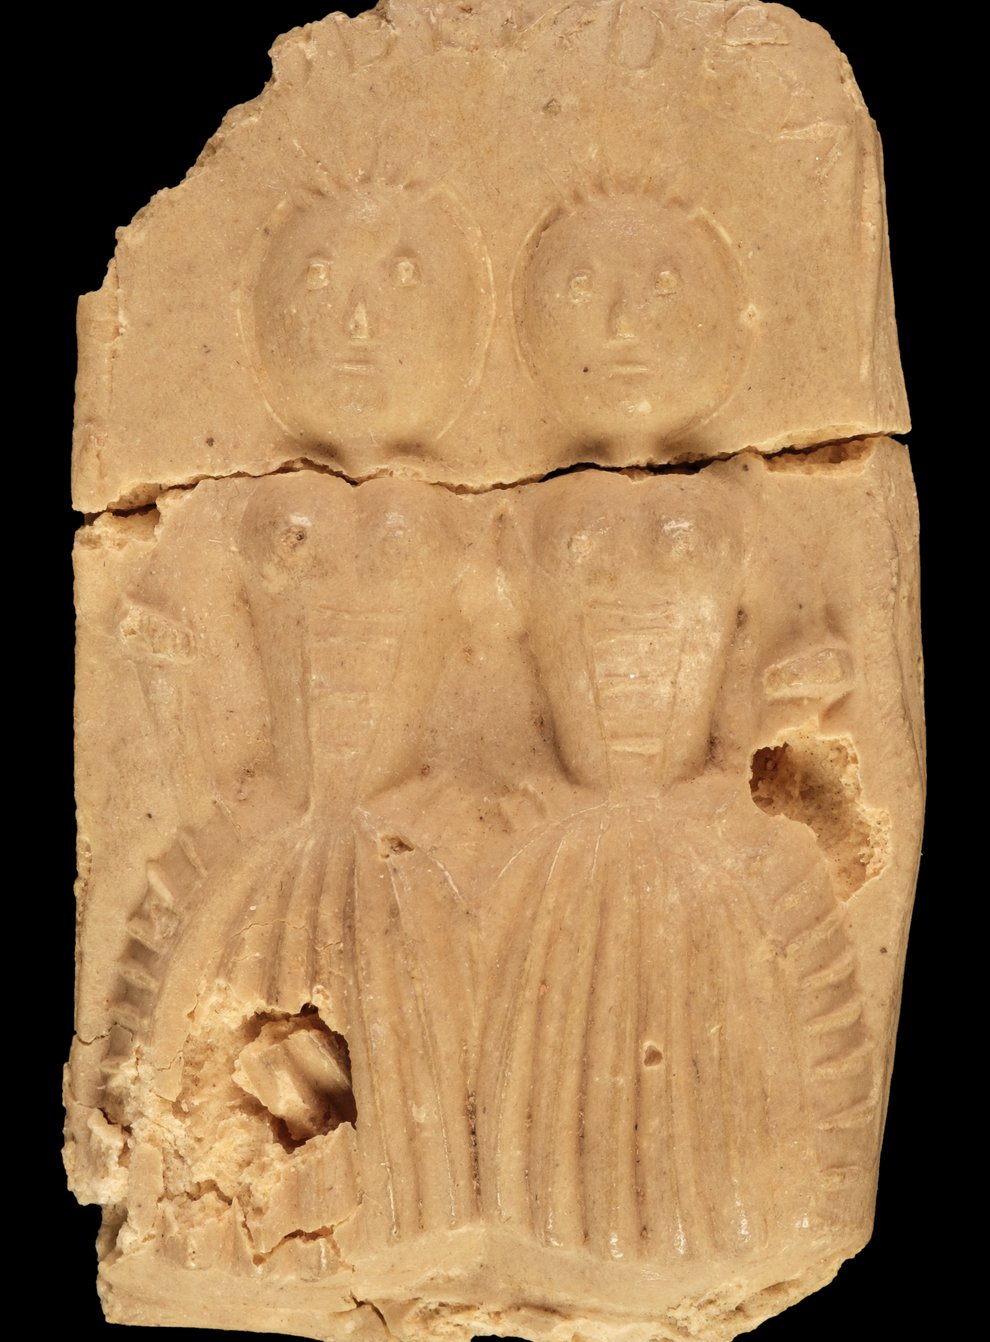 A Biddenden Cake with an image of Mary and Eliza Chulkhurst